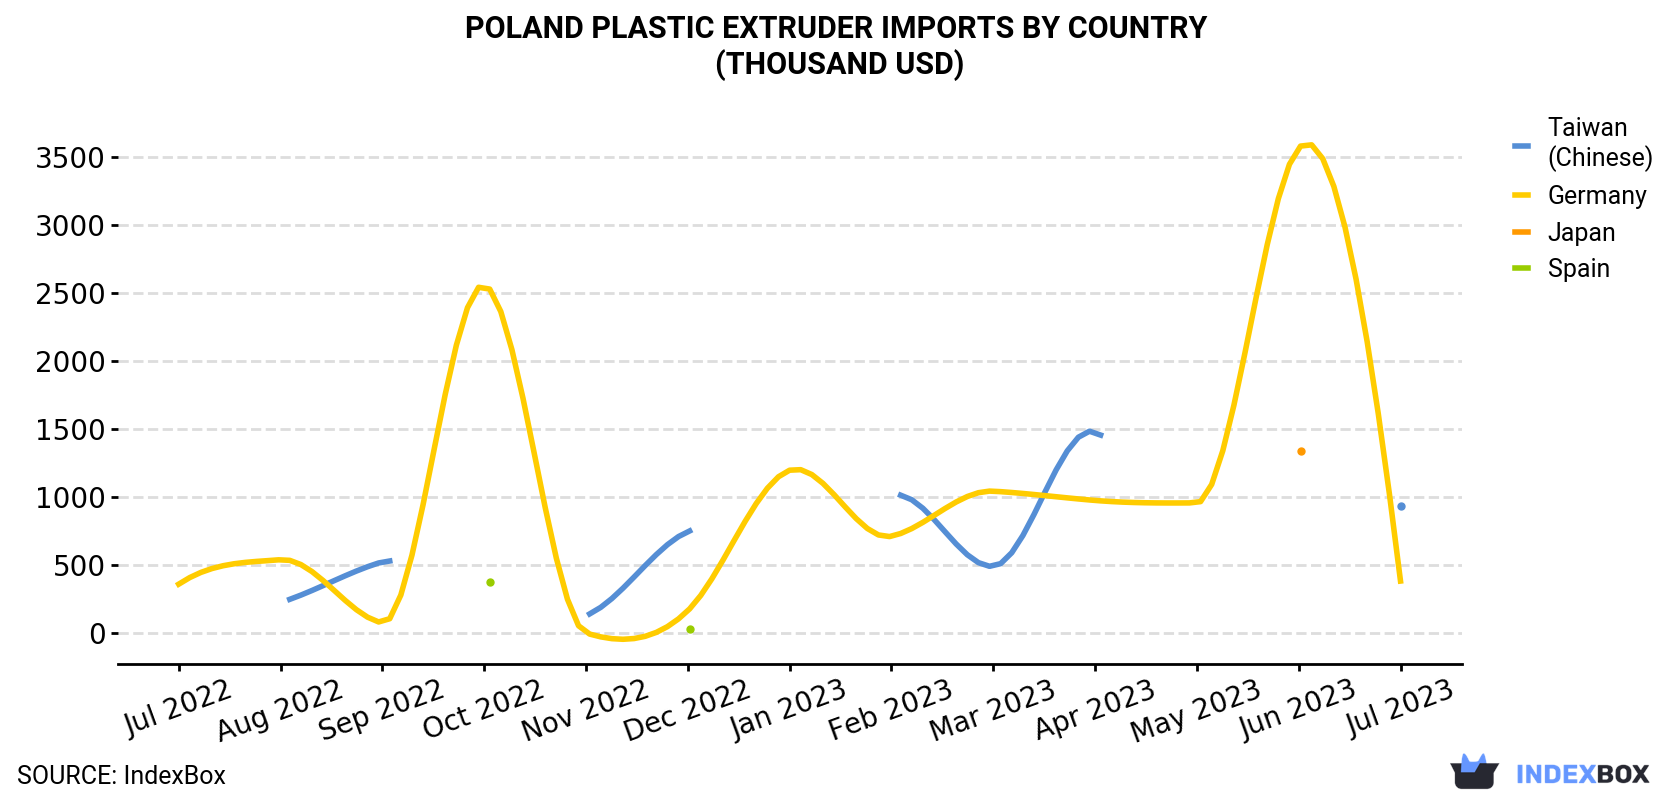 Poland Plastic Extruder Imports By Country (Thousand USD)